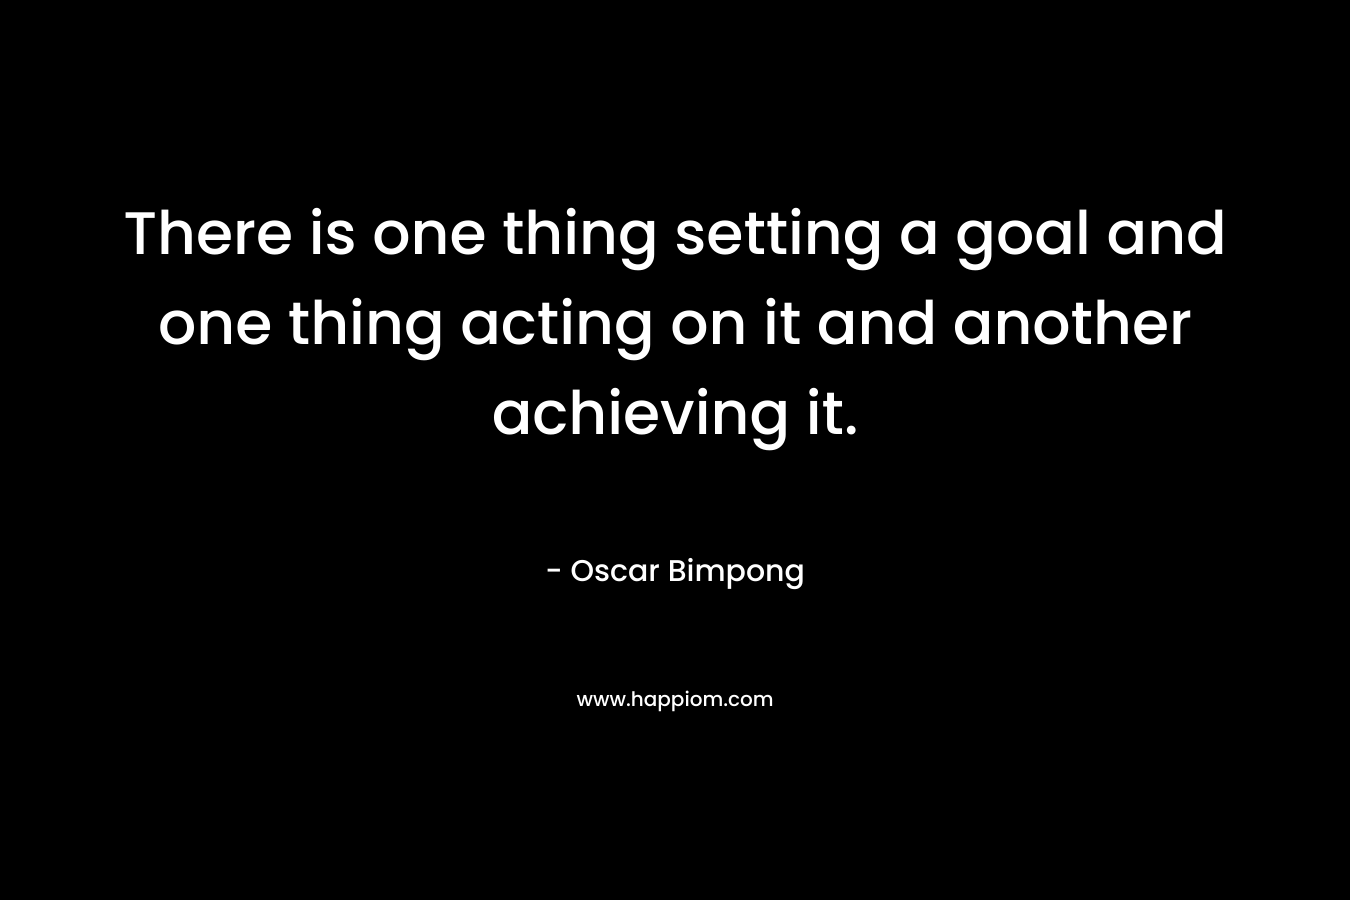 There is one thing setting a goal and one thing acting on it and another achieving it. – Oscar Bimpong